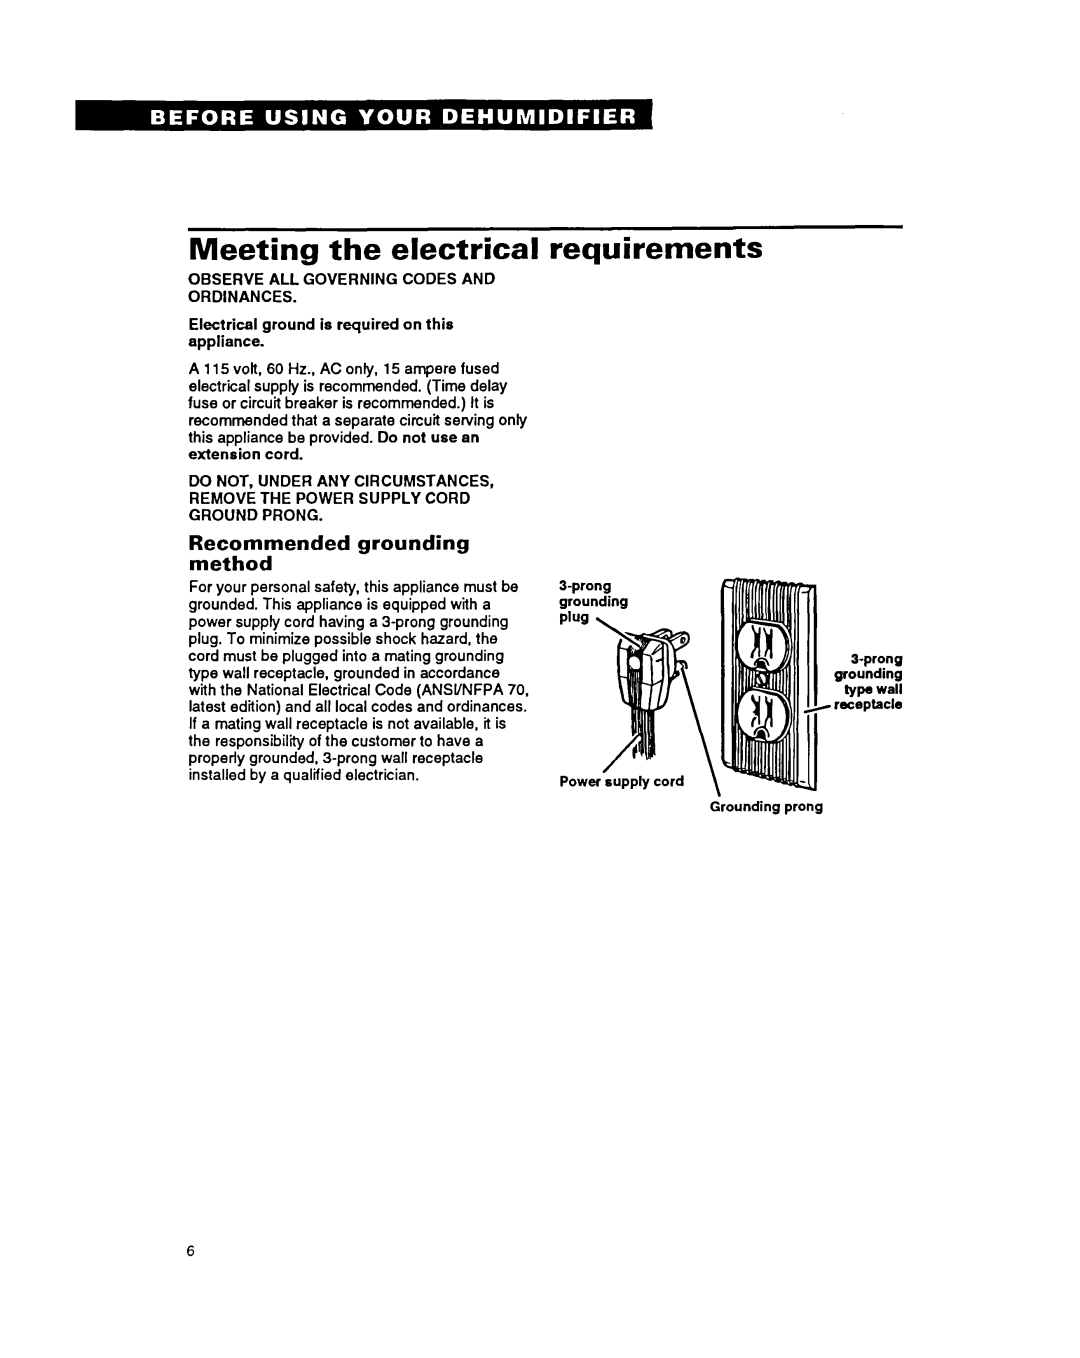 Whirlpool ADO15, ADO40 warranty Meeting the electrical requirements, Recommended grounding method 